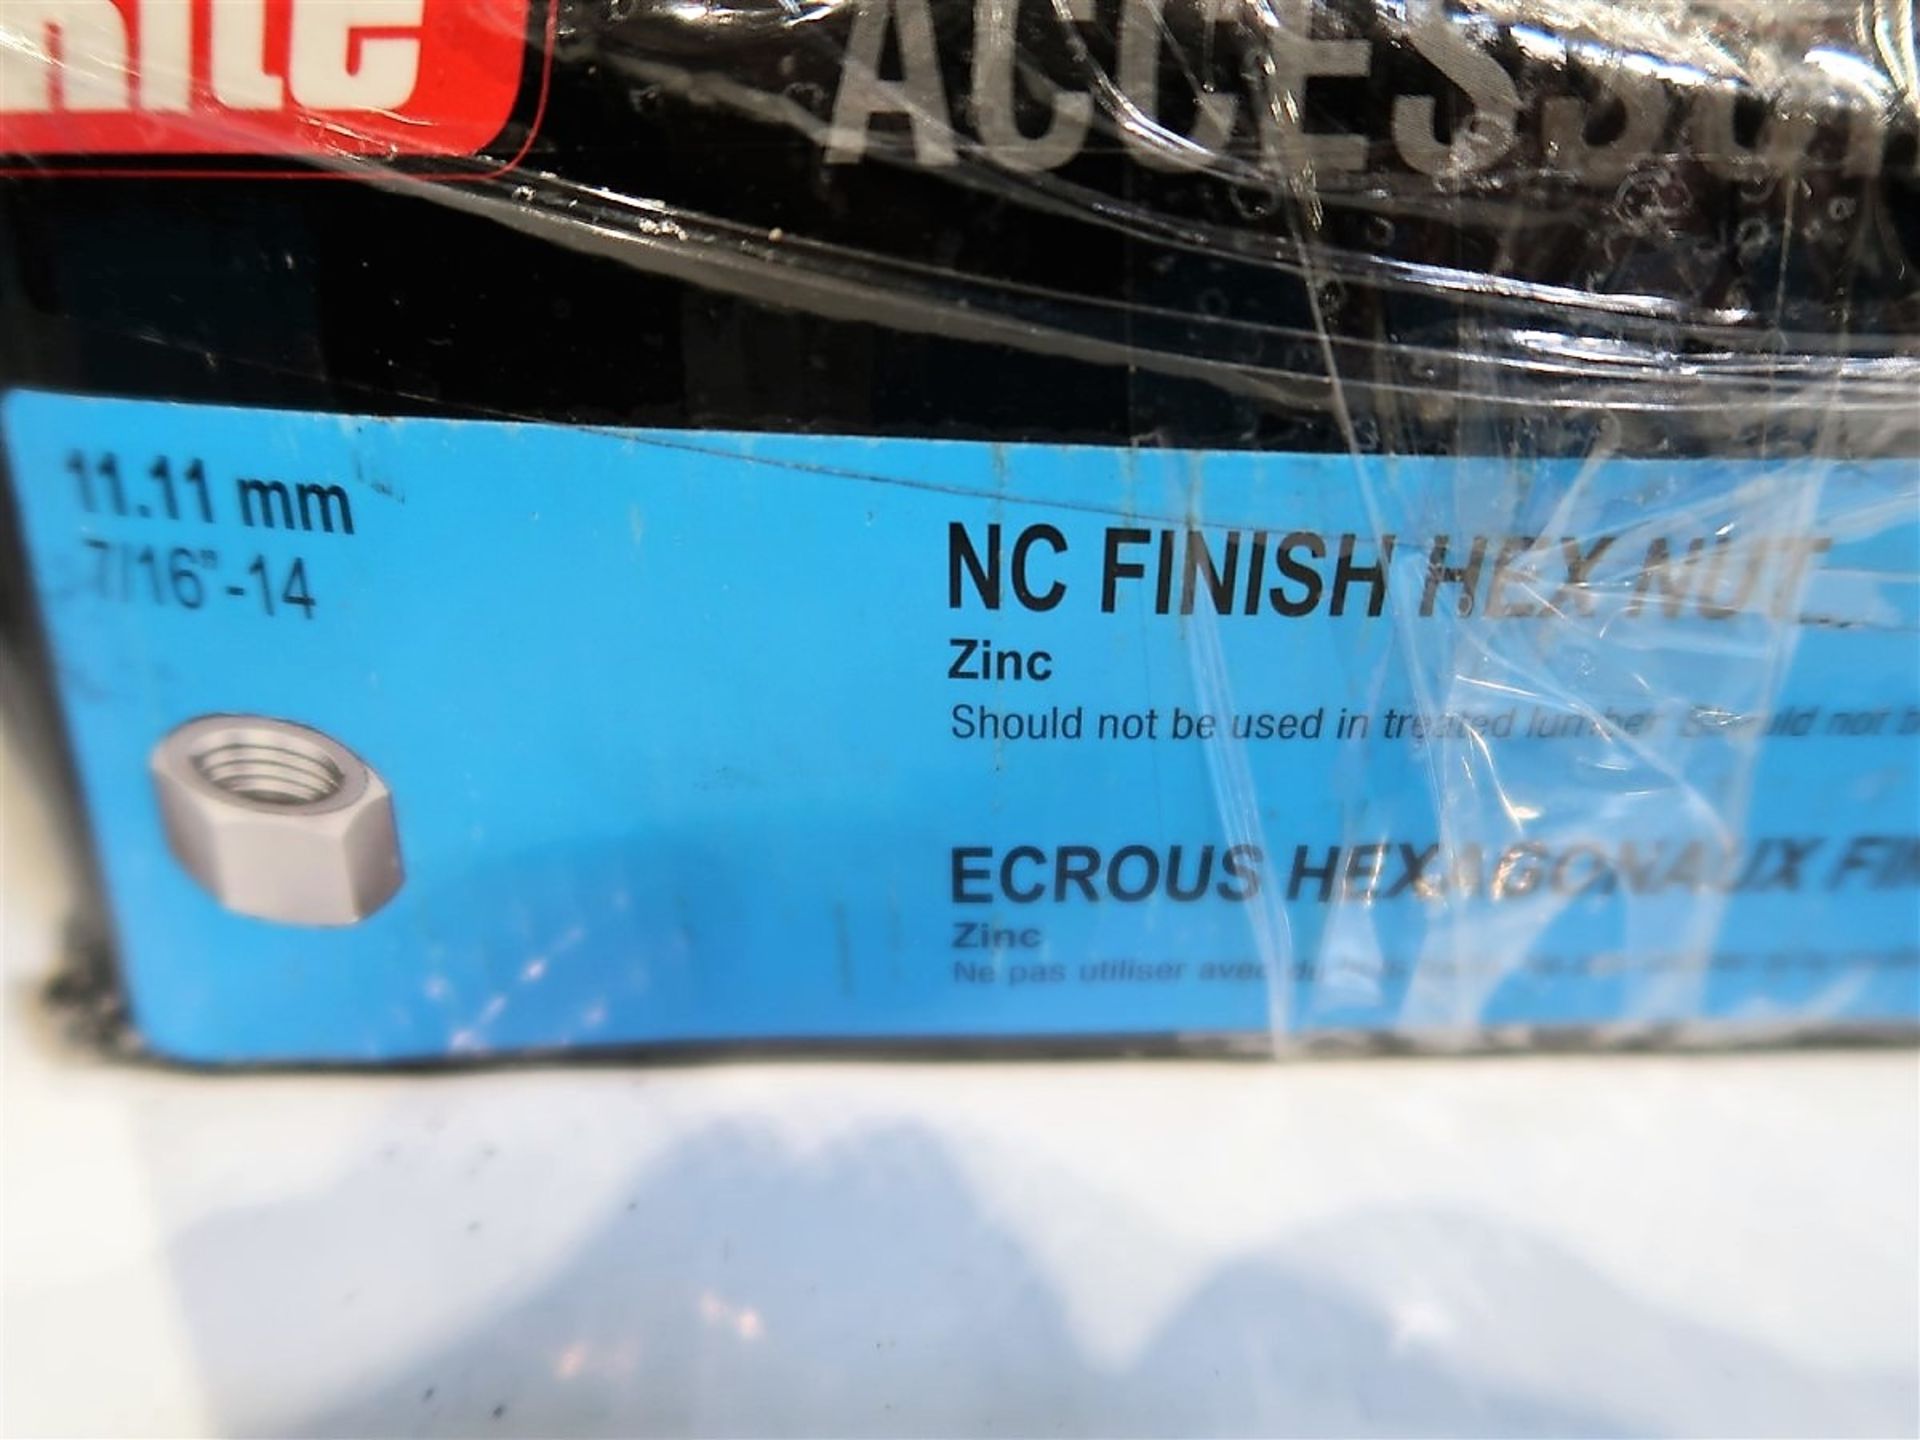 BOX OF NC FINISH NUTS 11.11 MM / 7/16IN-14, ZINC PLATED, 1400 PCS. - Image 2 of 2